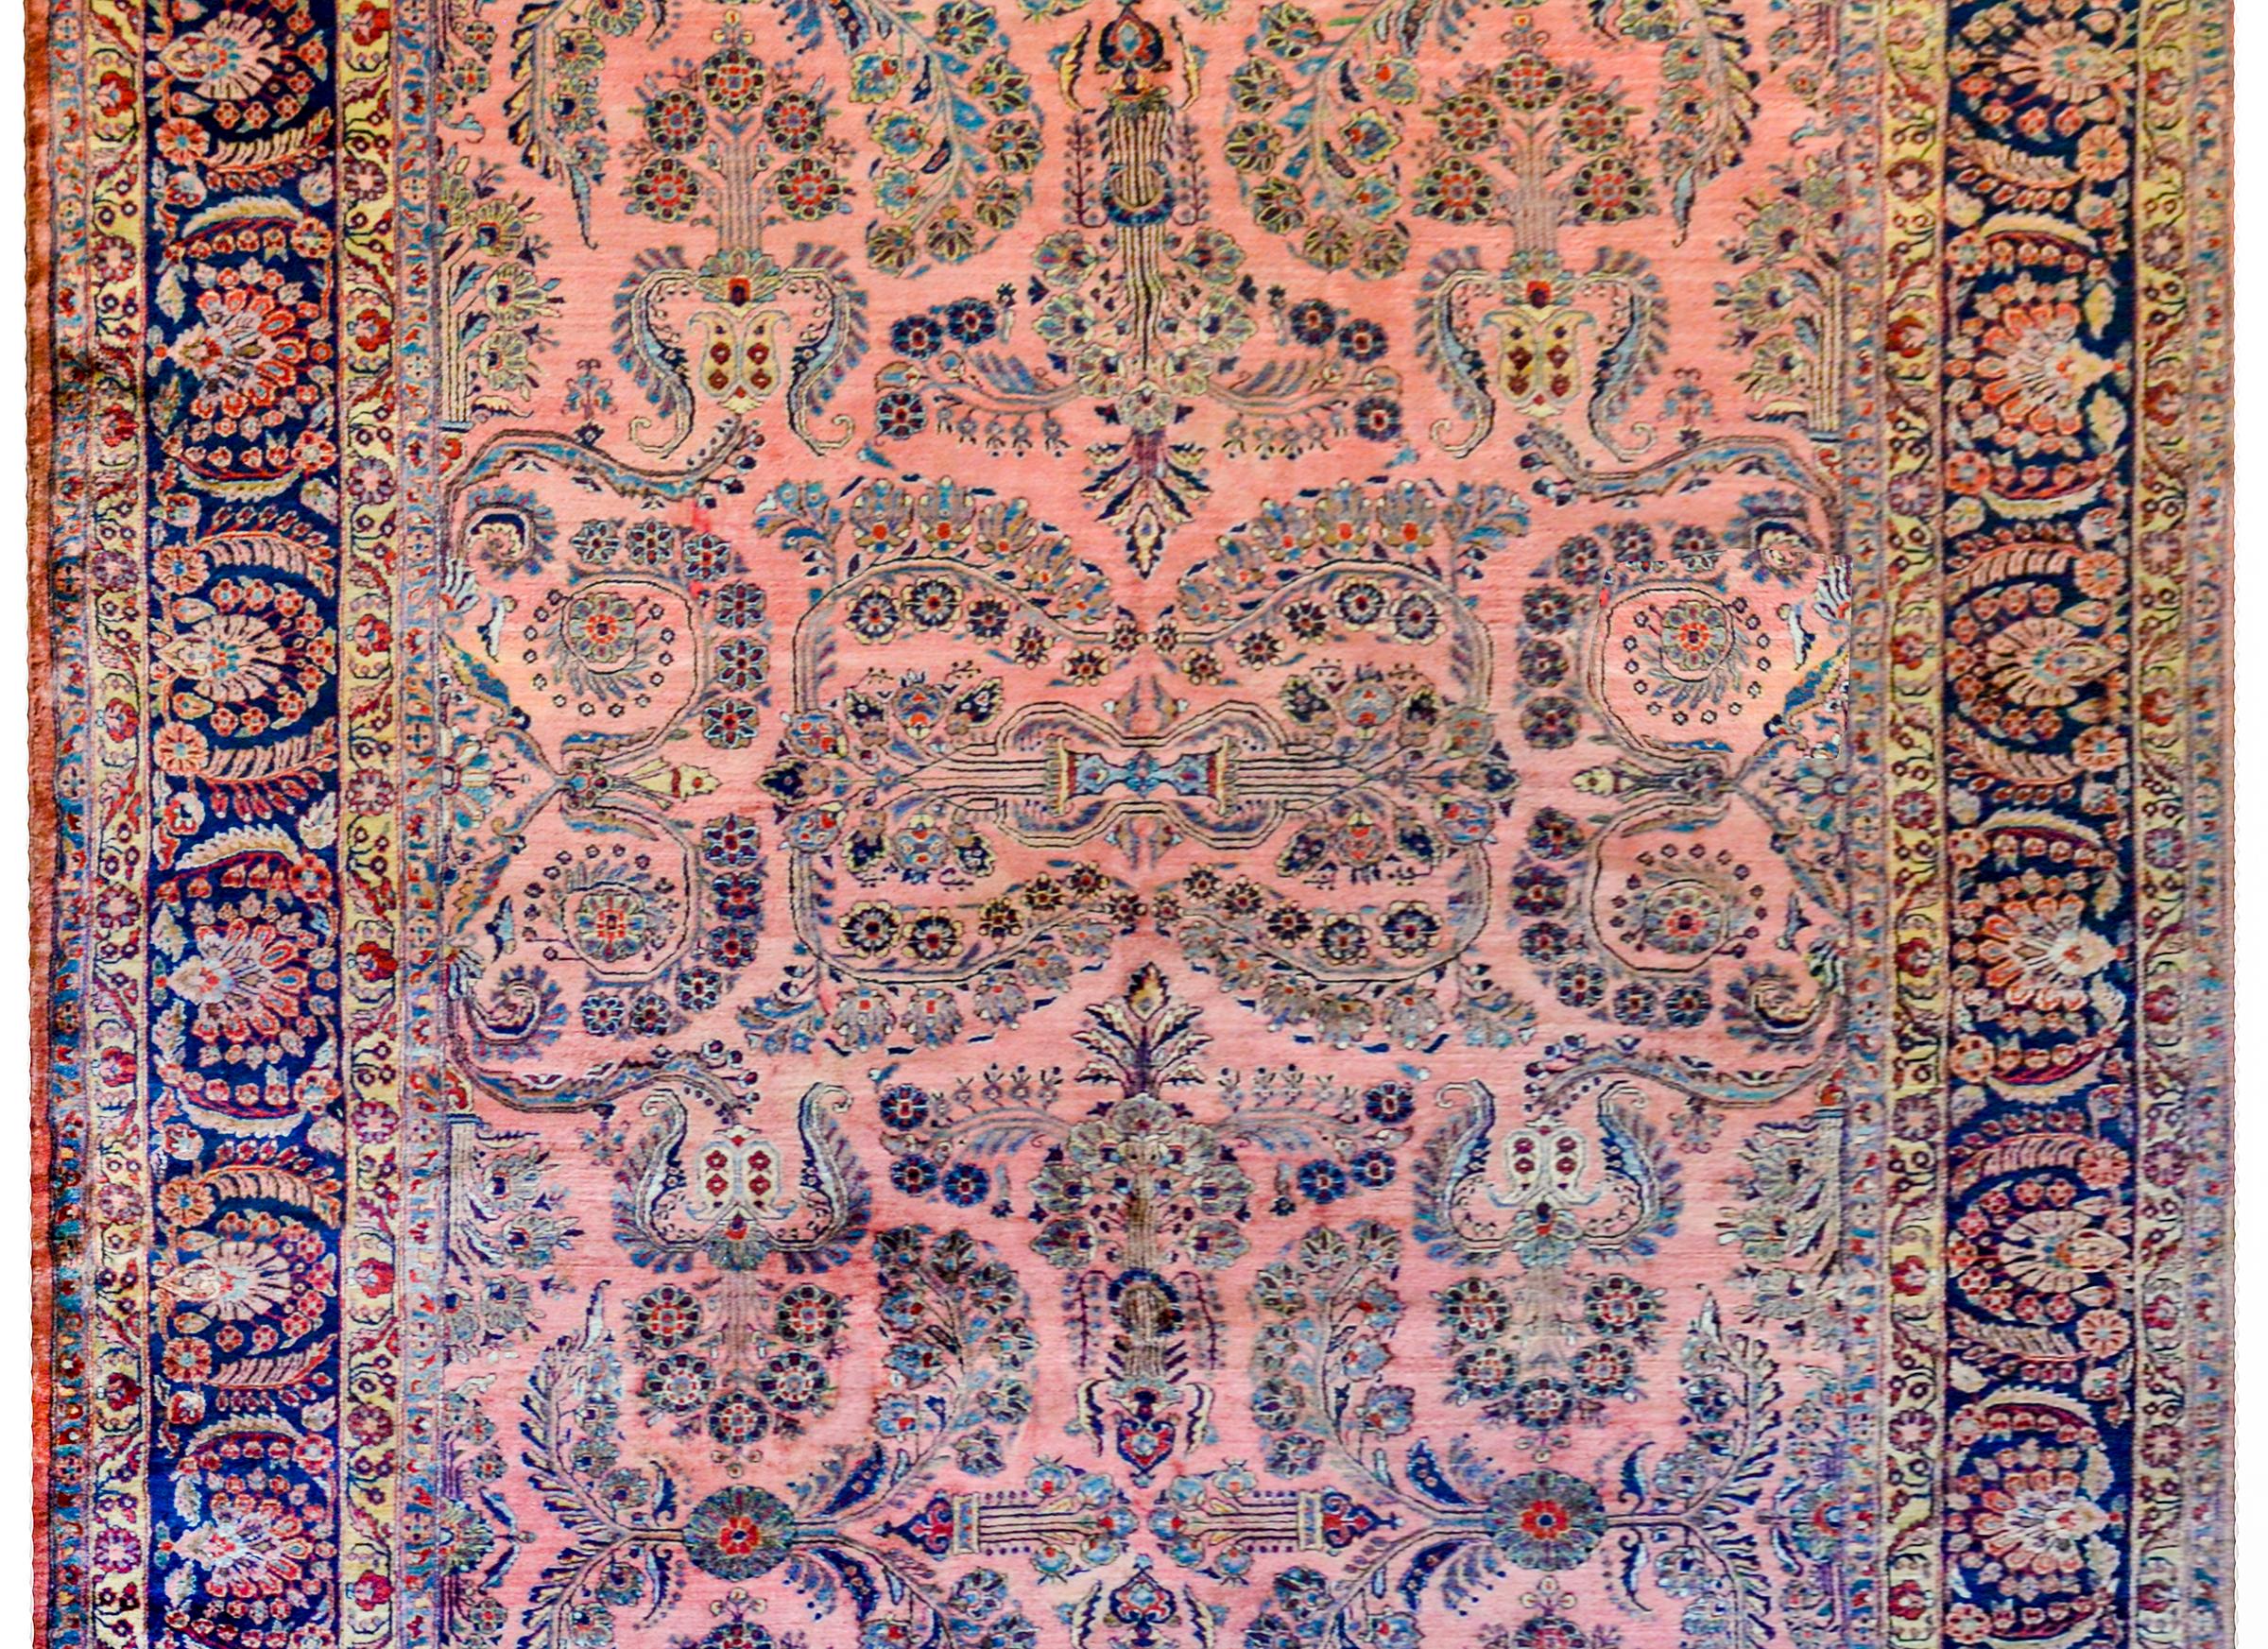 An incredible early 20th century Persian Sarouk rug with a beautiful all-over mirrored pattern of myriad flowers woven in crimson, light and dark indigo, and gold on a pale pink background. The border is outstanding with a large fanned floral